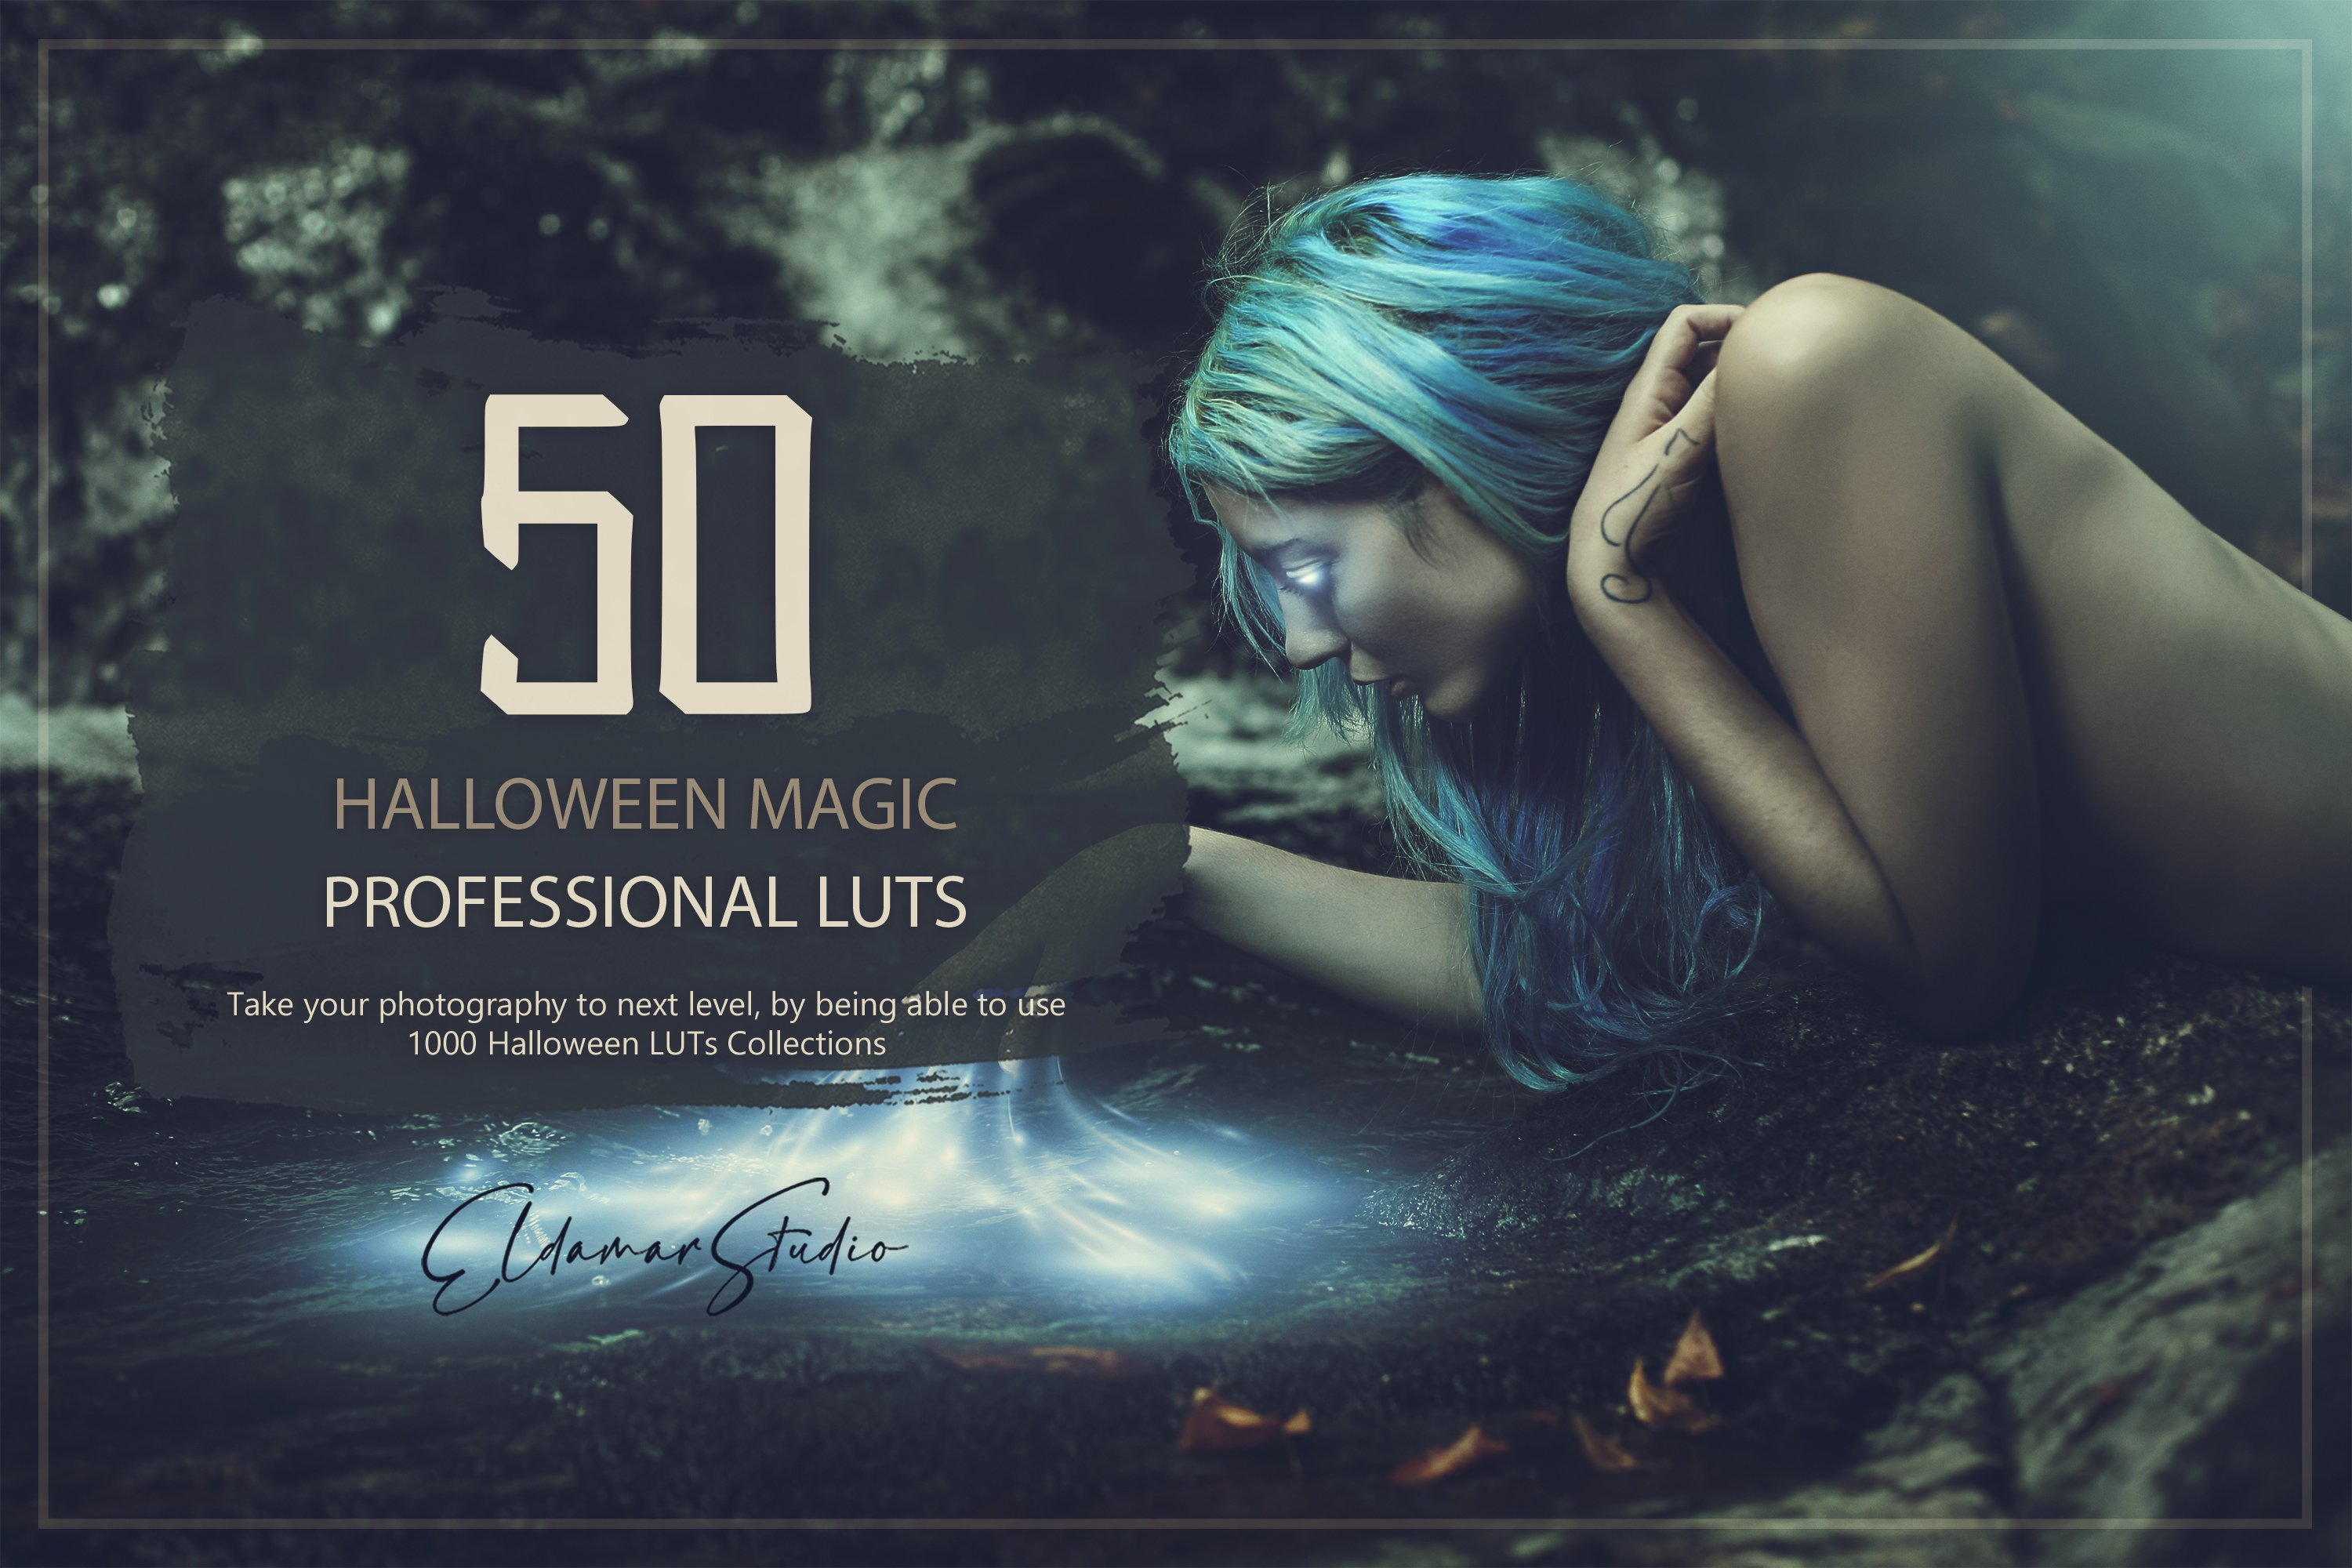 50 Halloween Magic LUTs and Presetscover image.